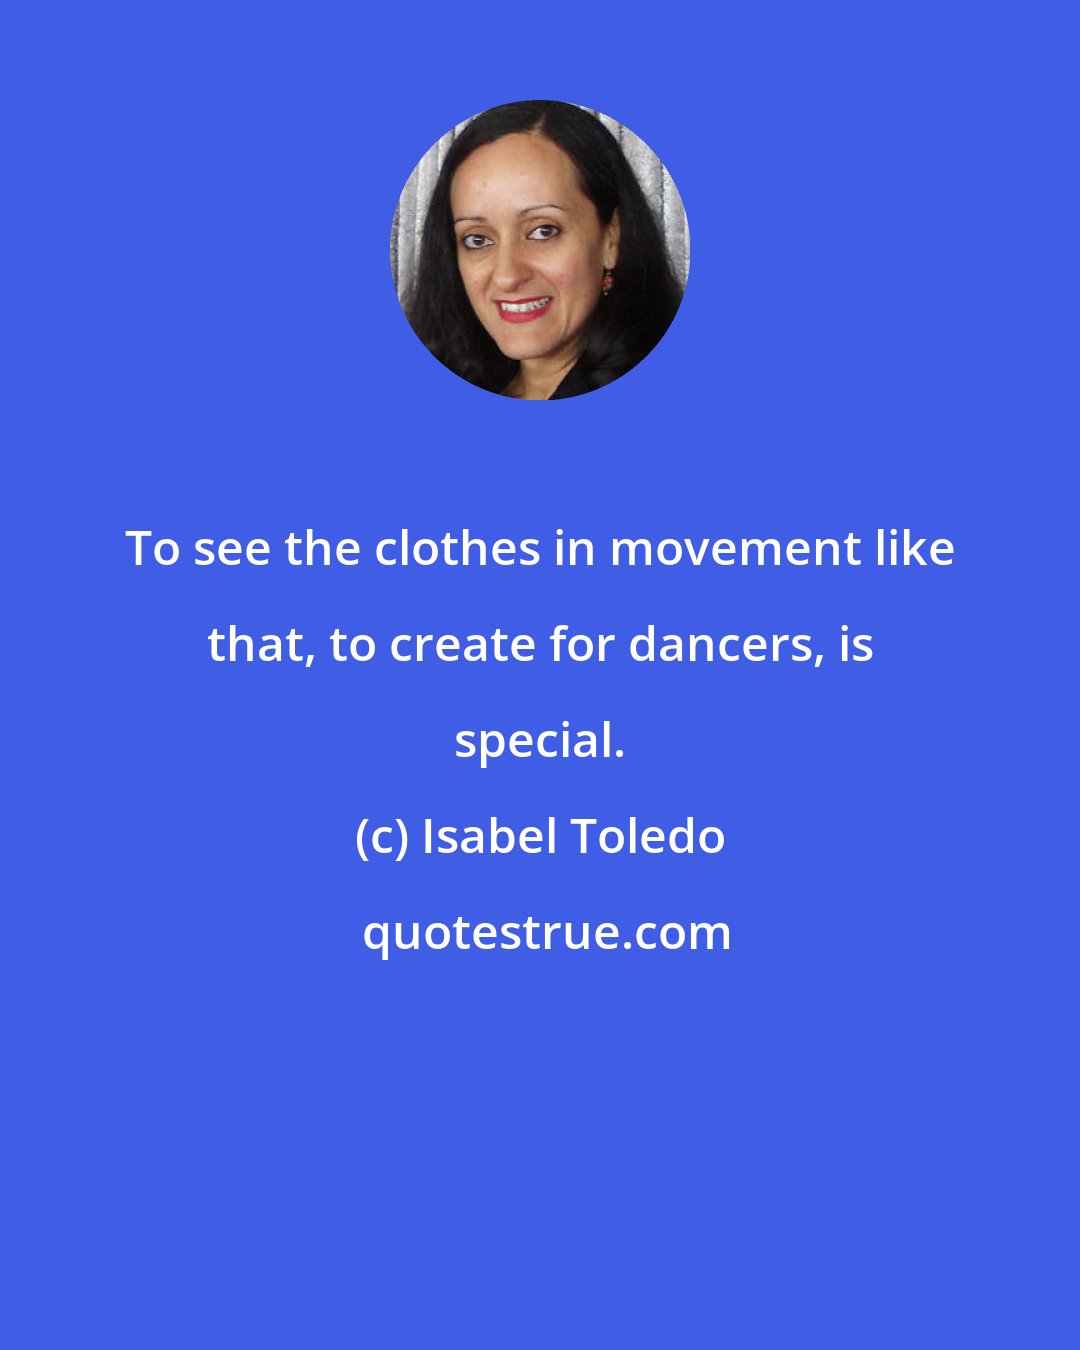 Isabel Toledo: To see the clothes in movement like that, to create for dancers, is special.